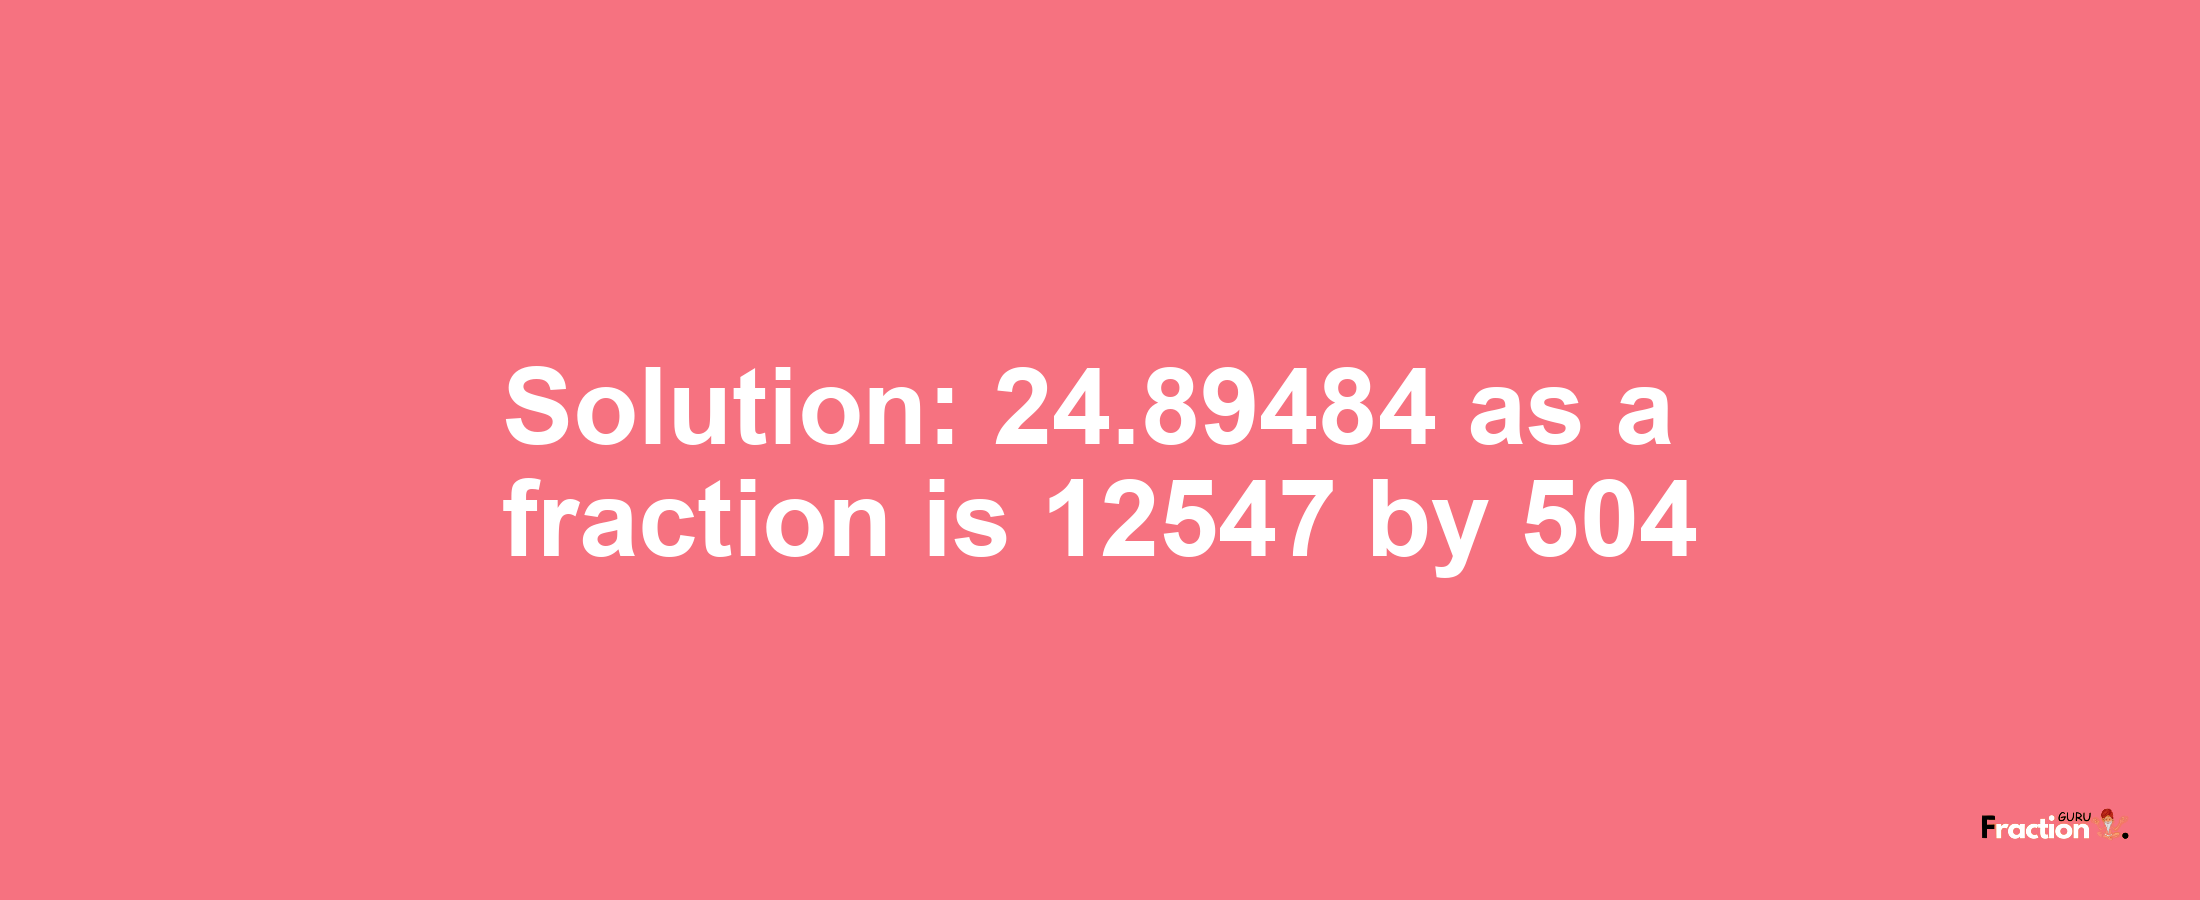 Solution:24.89484 as a fraction is 12547/504